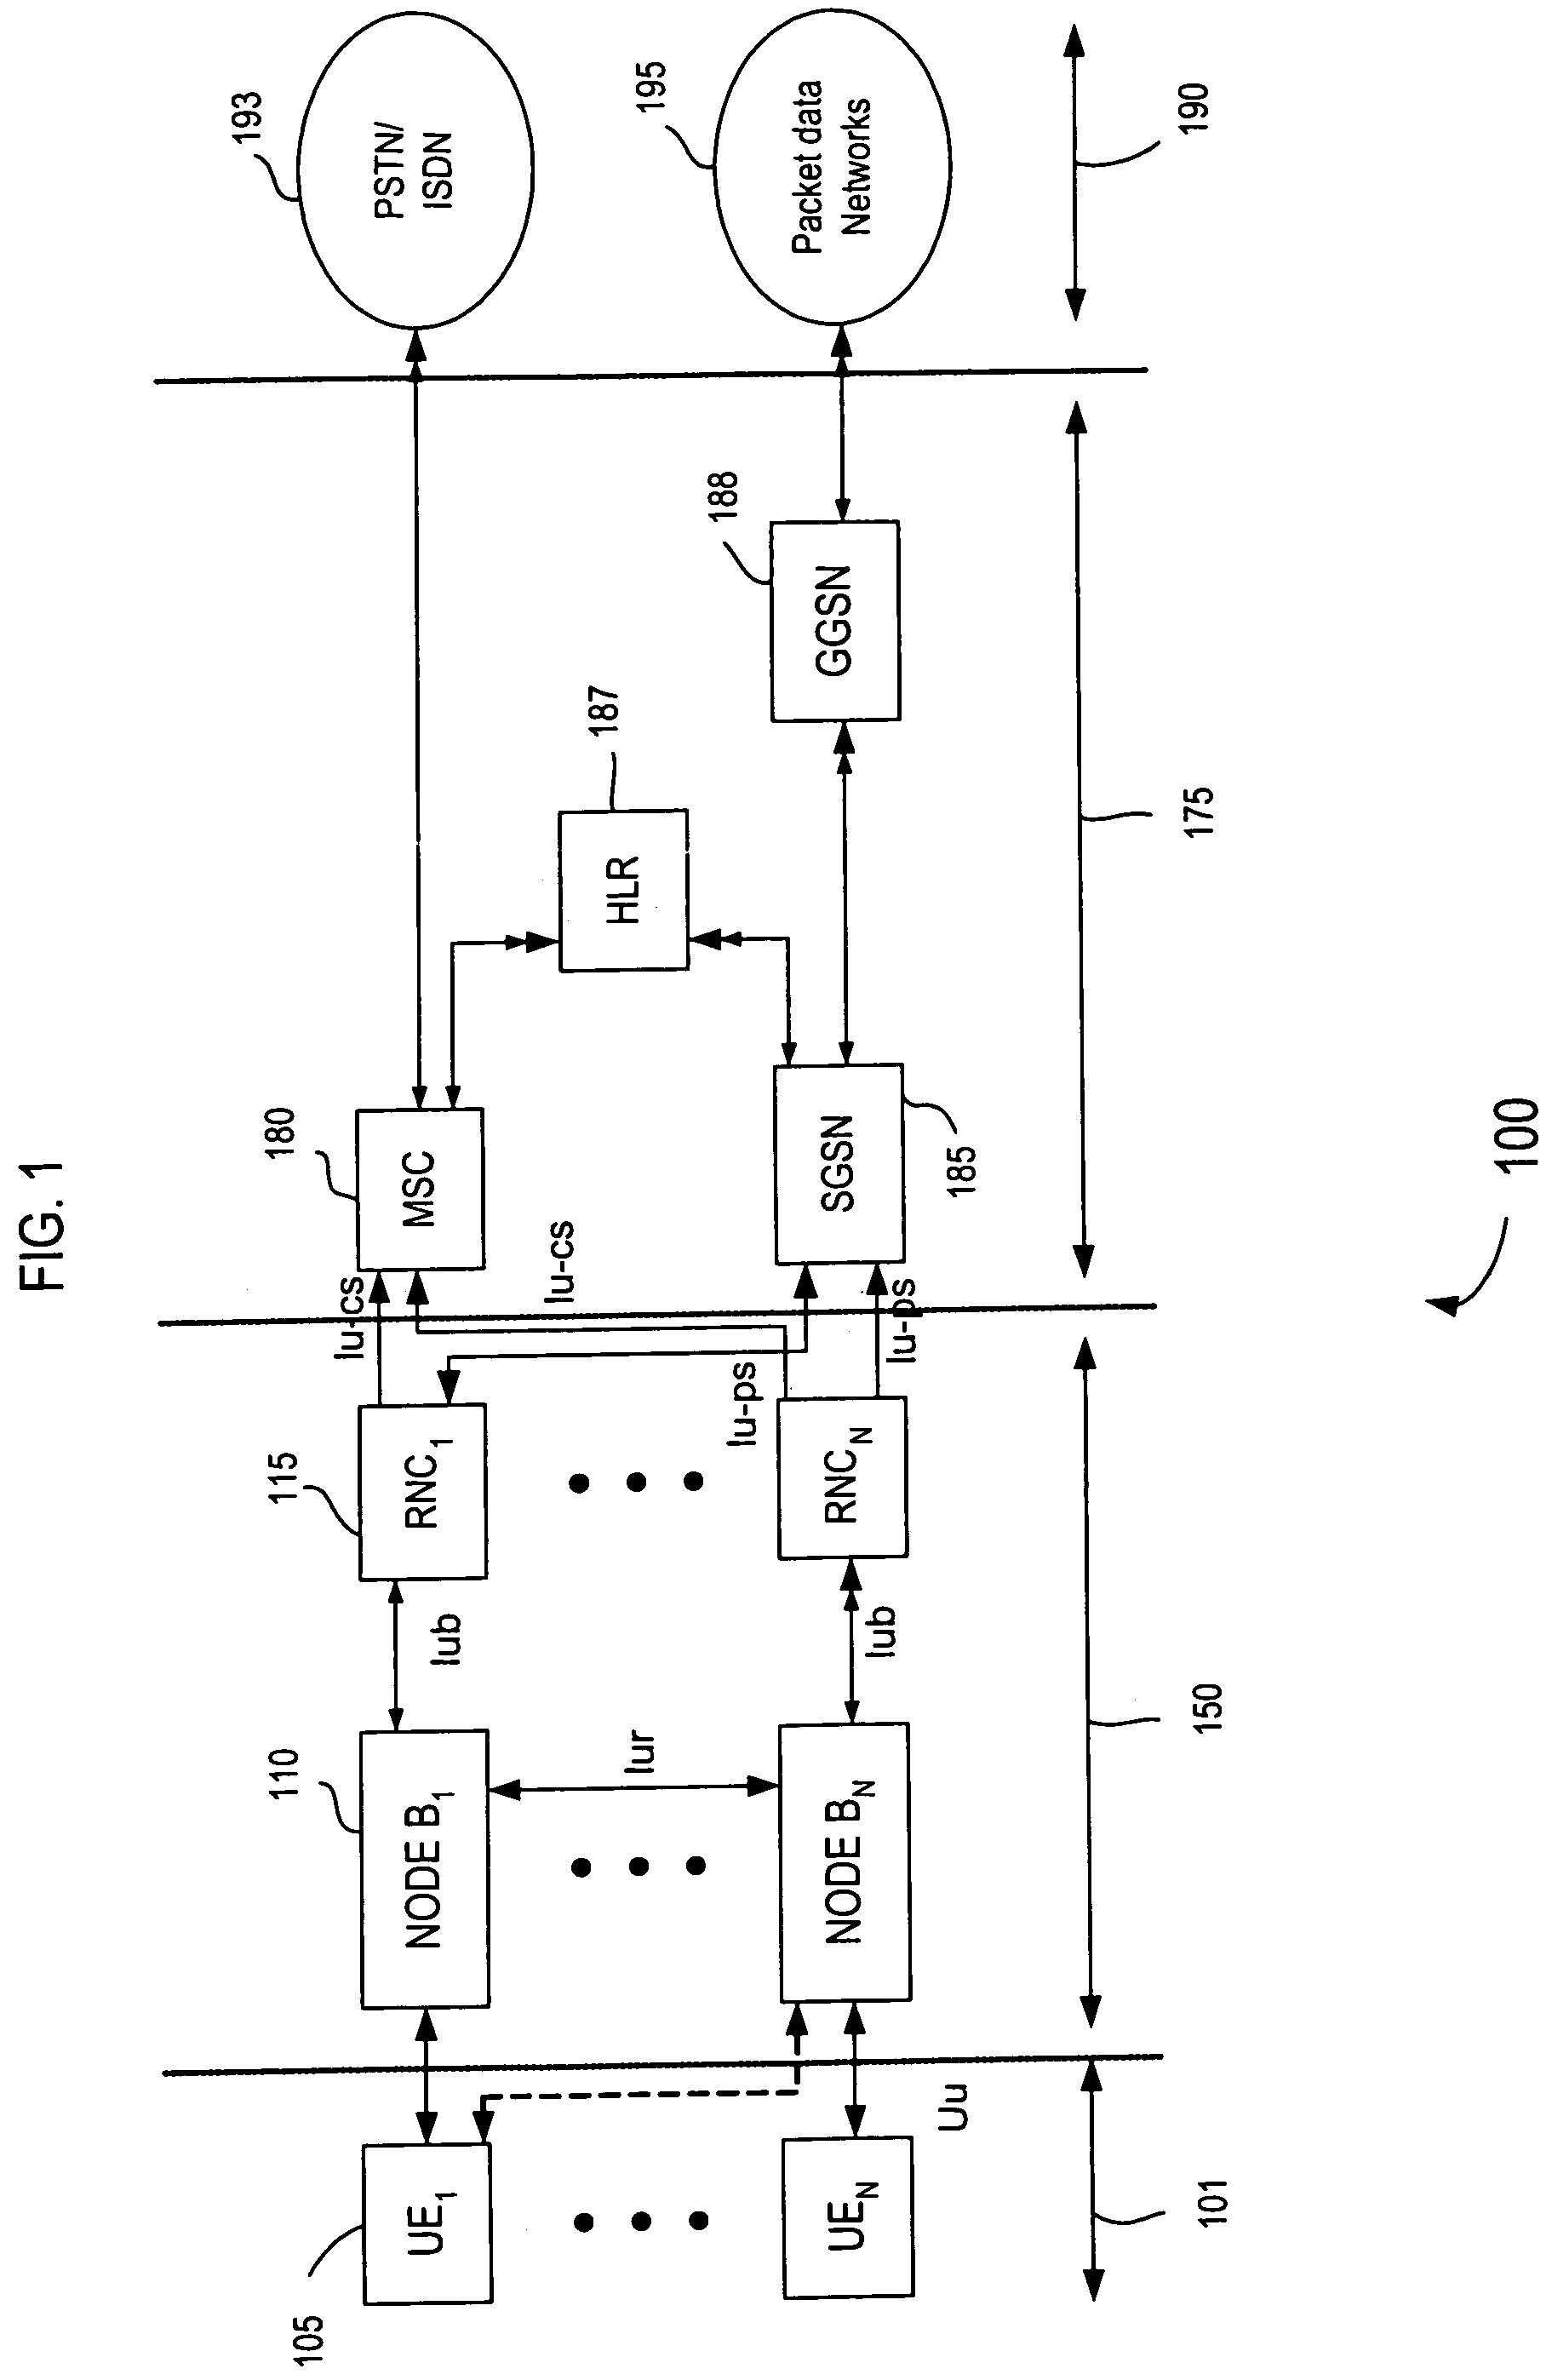 Methods of detecting protocol support in wireless communication systems